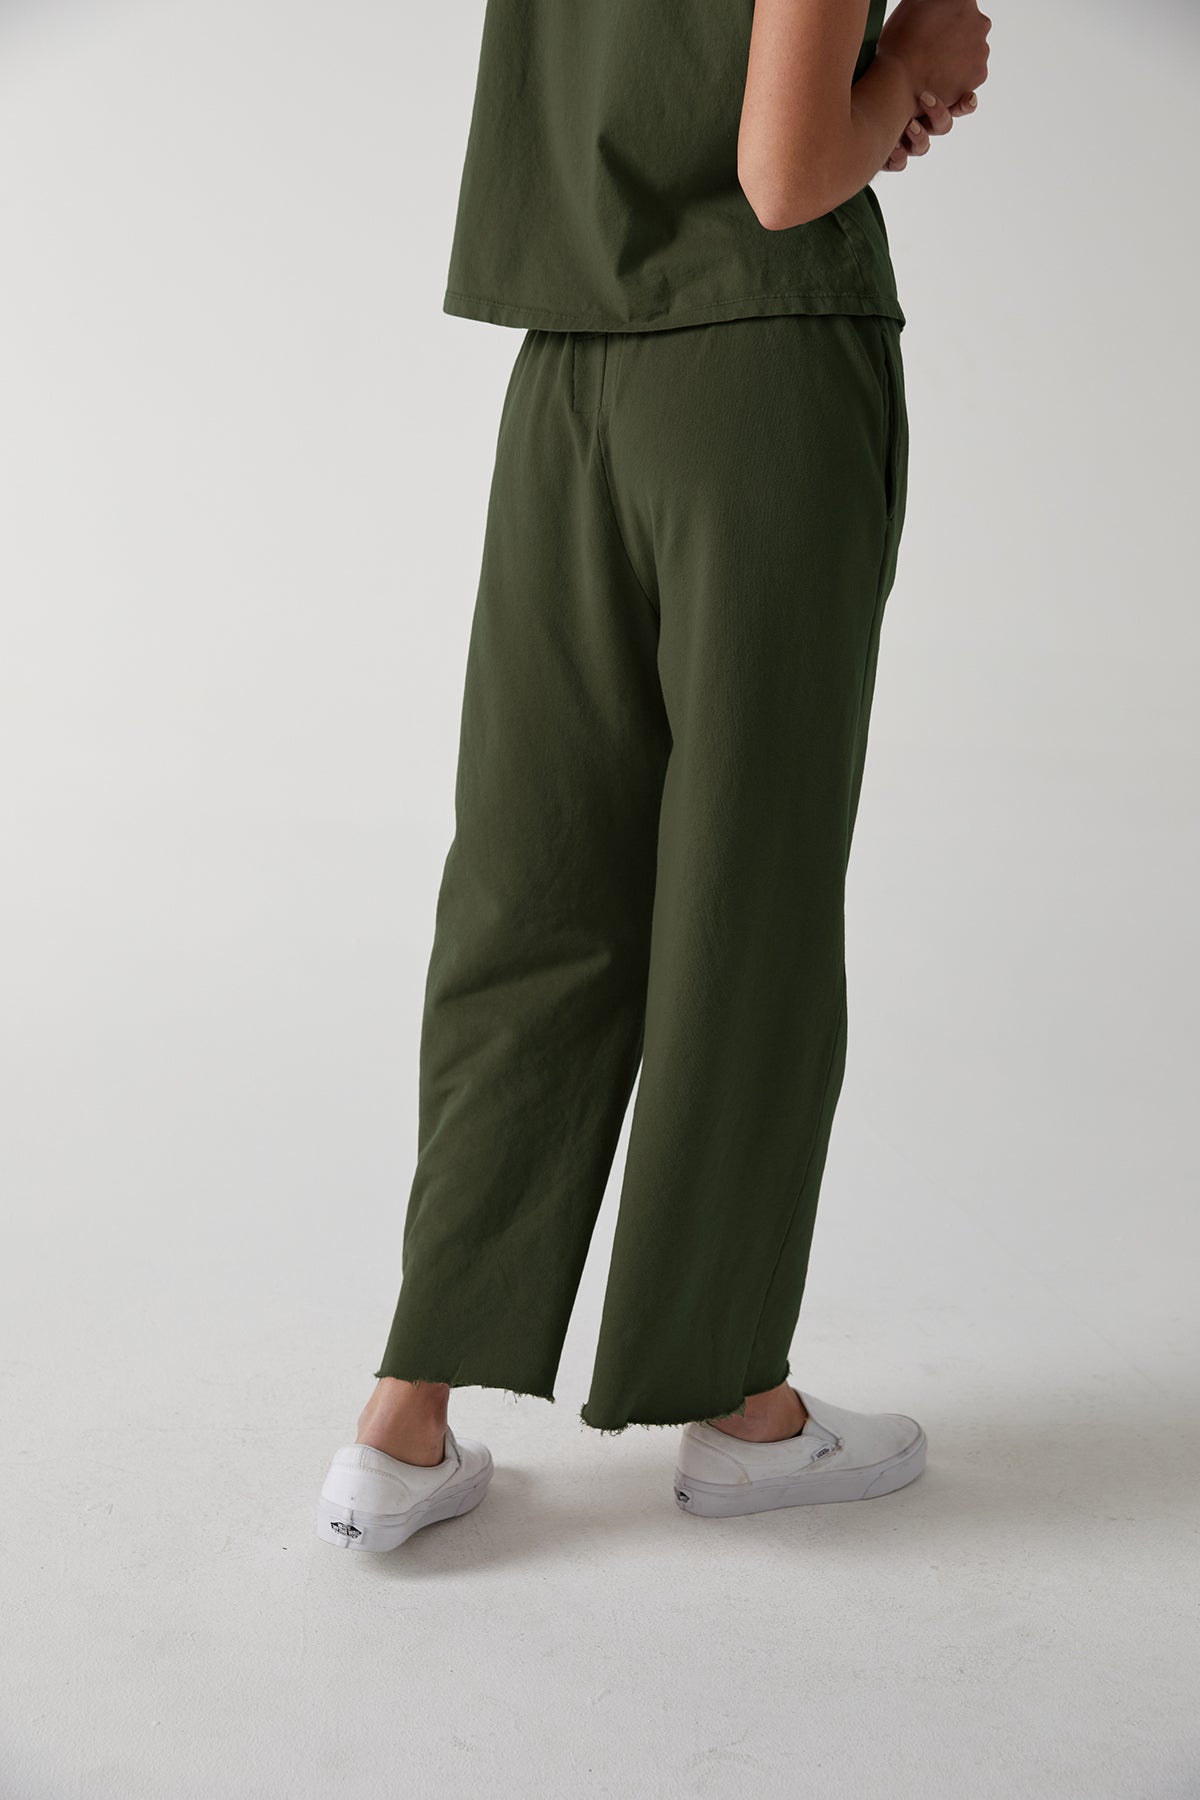 Montecito Sweatpant in dillweed green back-24331160879297